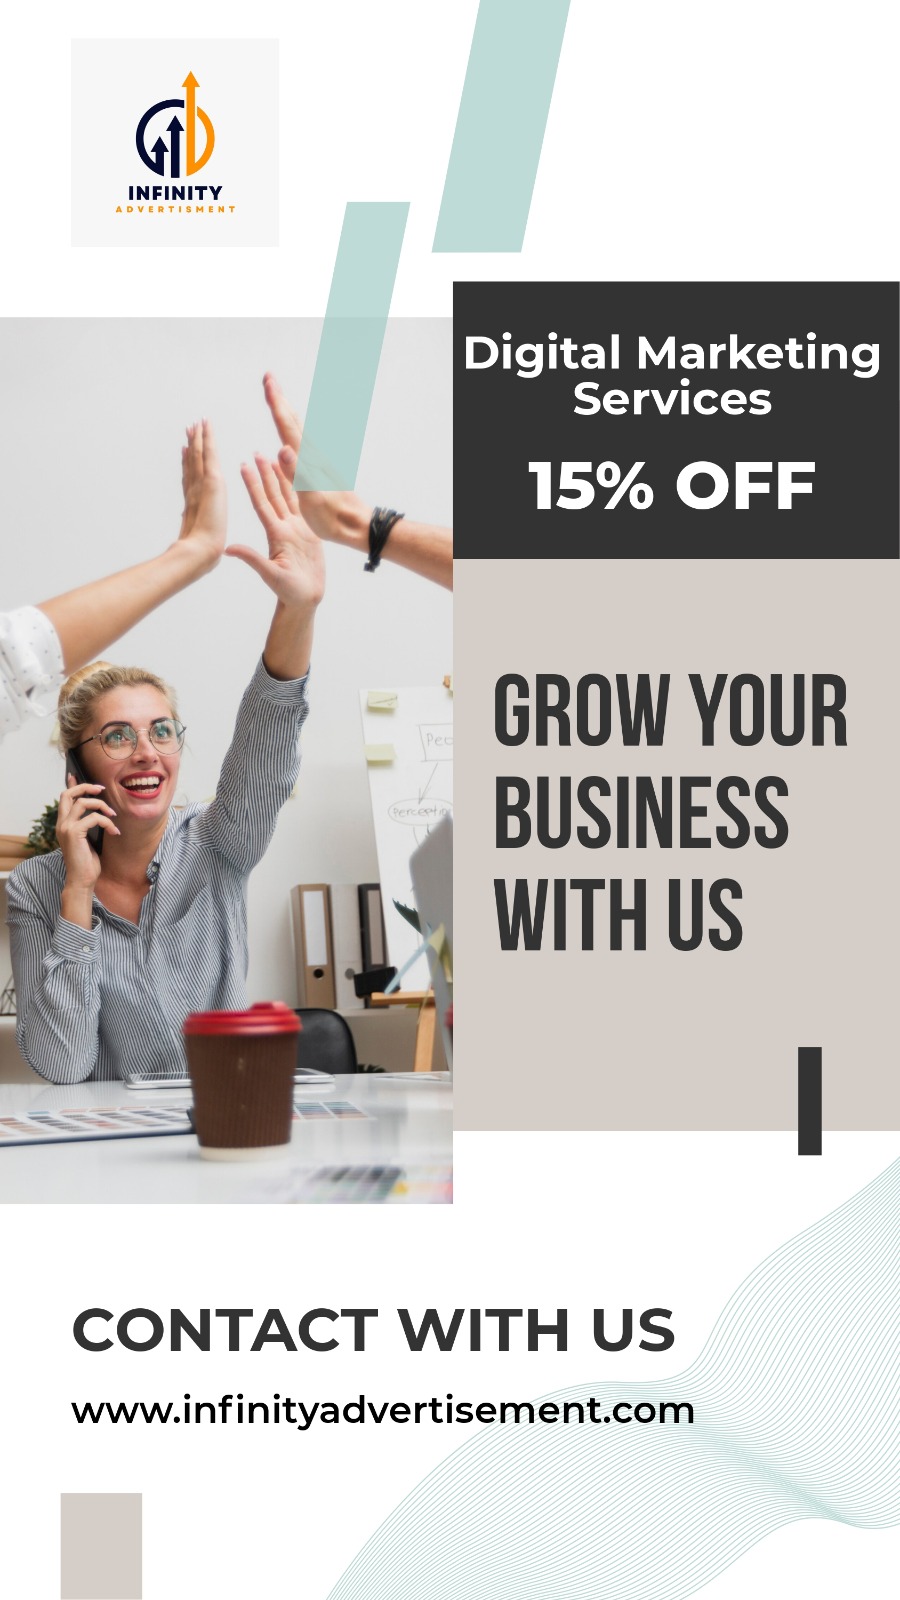 INFINITY

Digital Marketing
Services

15% OFF

  
 

~ GROW YOUR
BUSINESS
WITH US

roy

CONTACT WITH US

www.infinityadvertisement.com